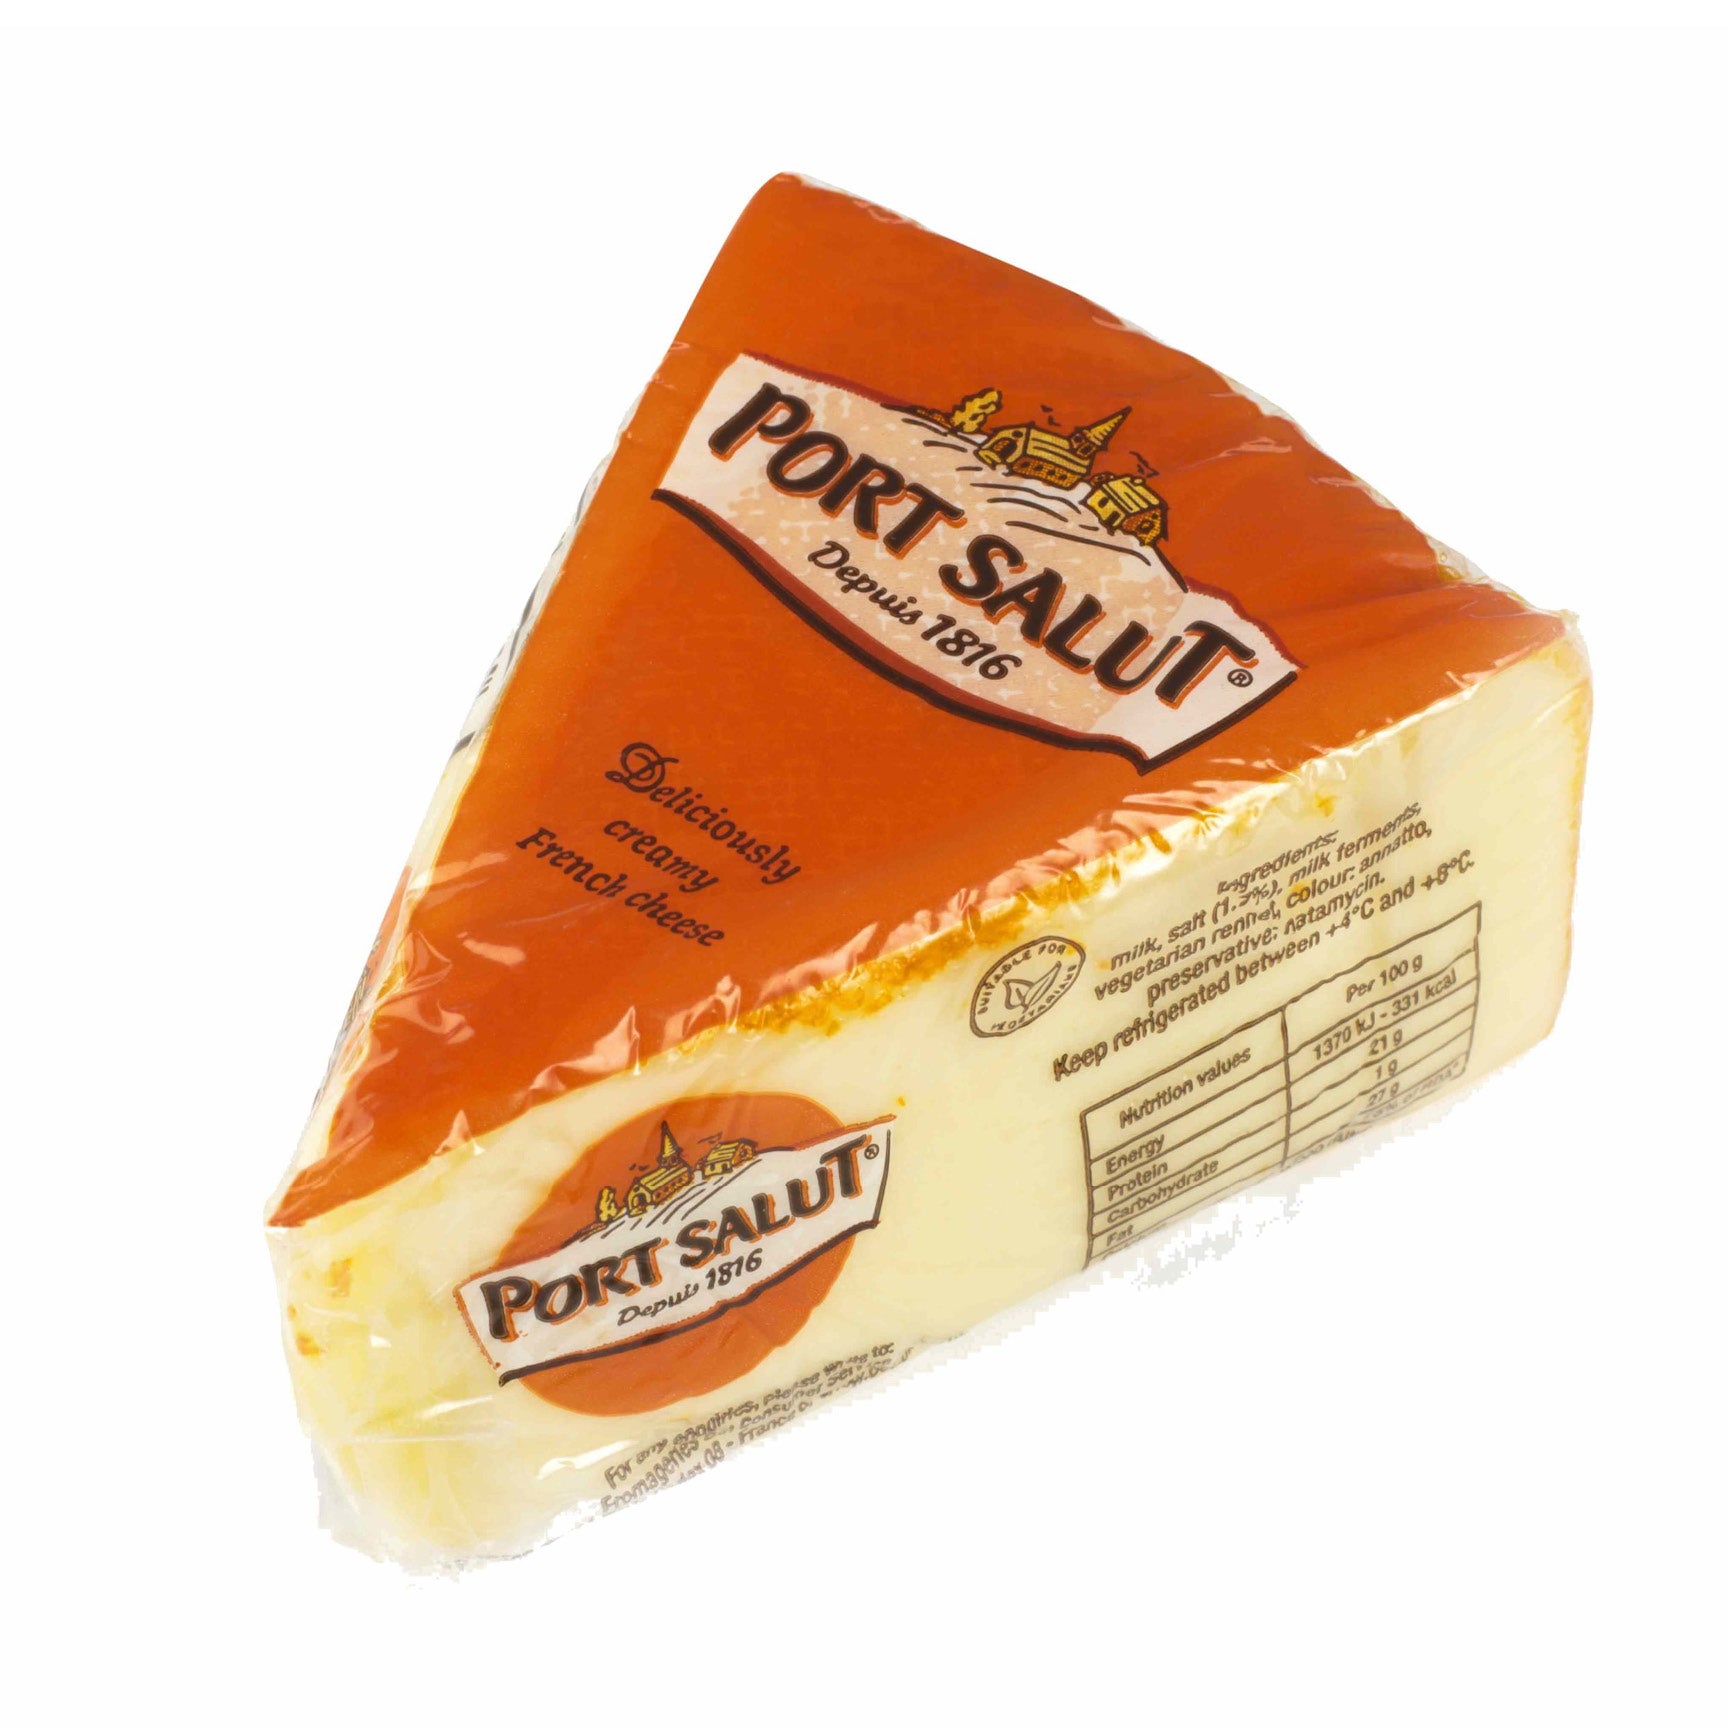 French Port Salut Cheese Wedge, 150g